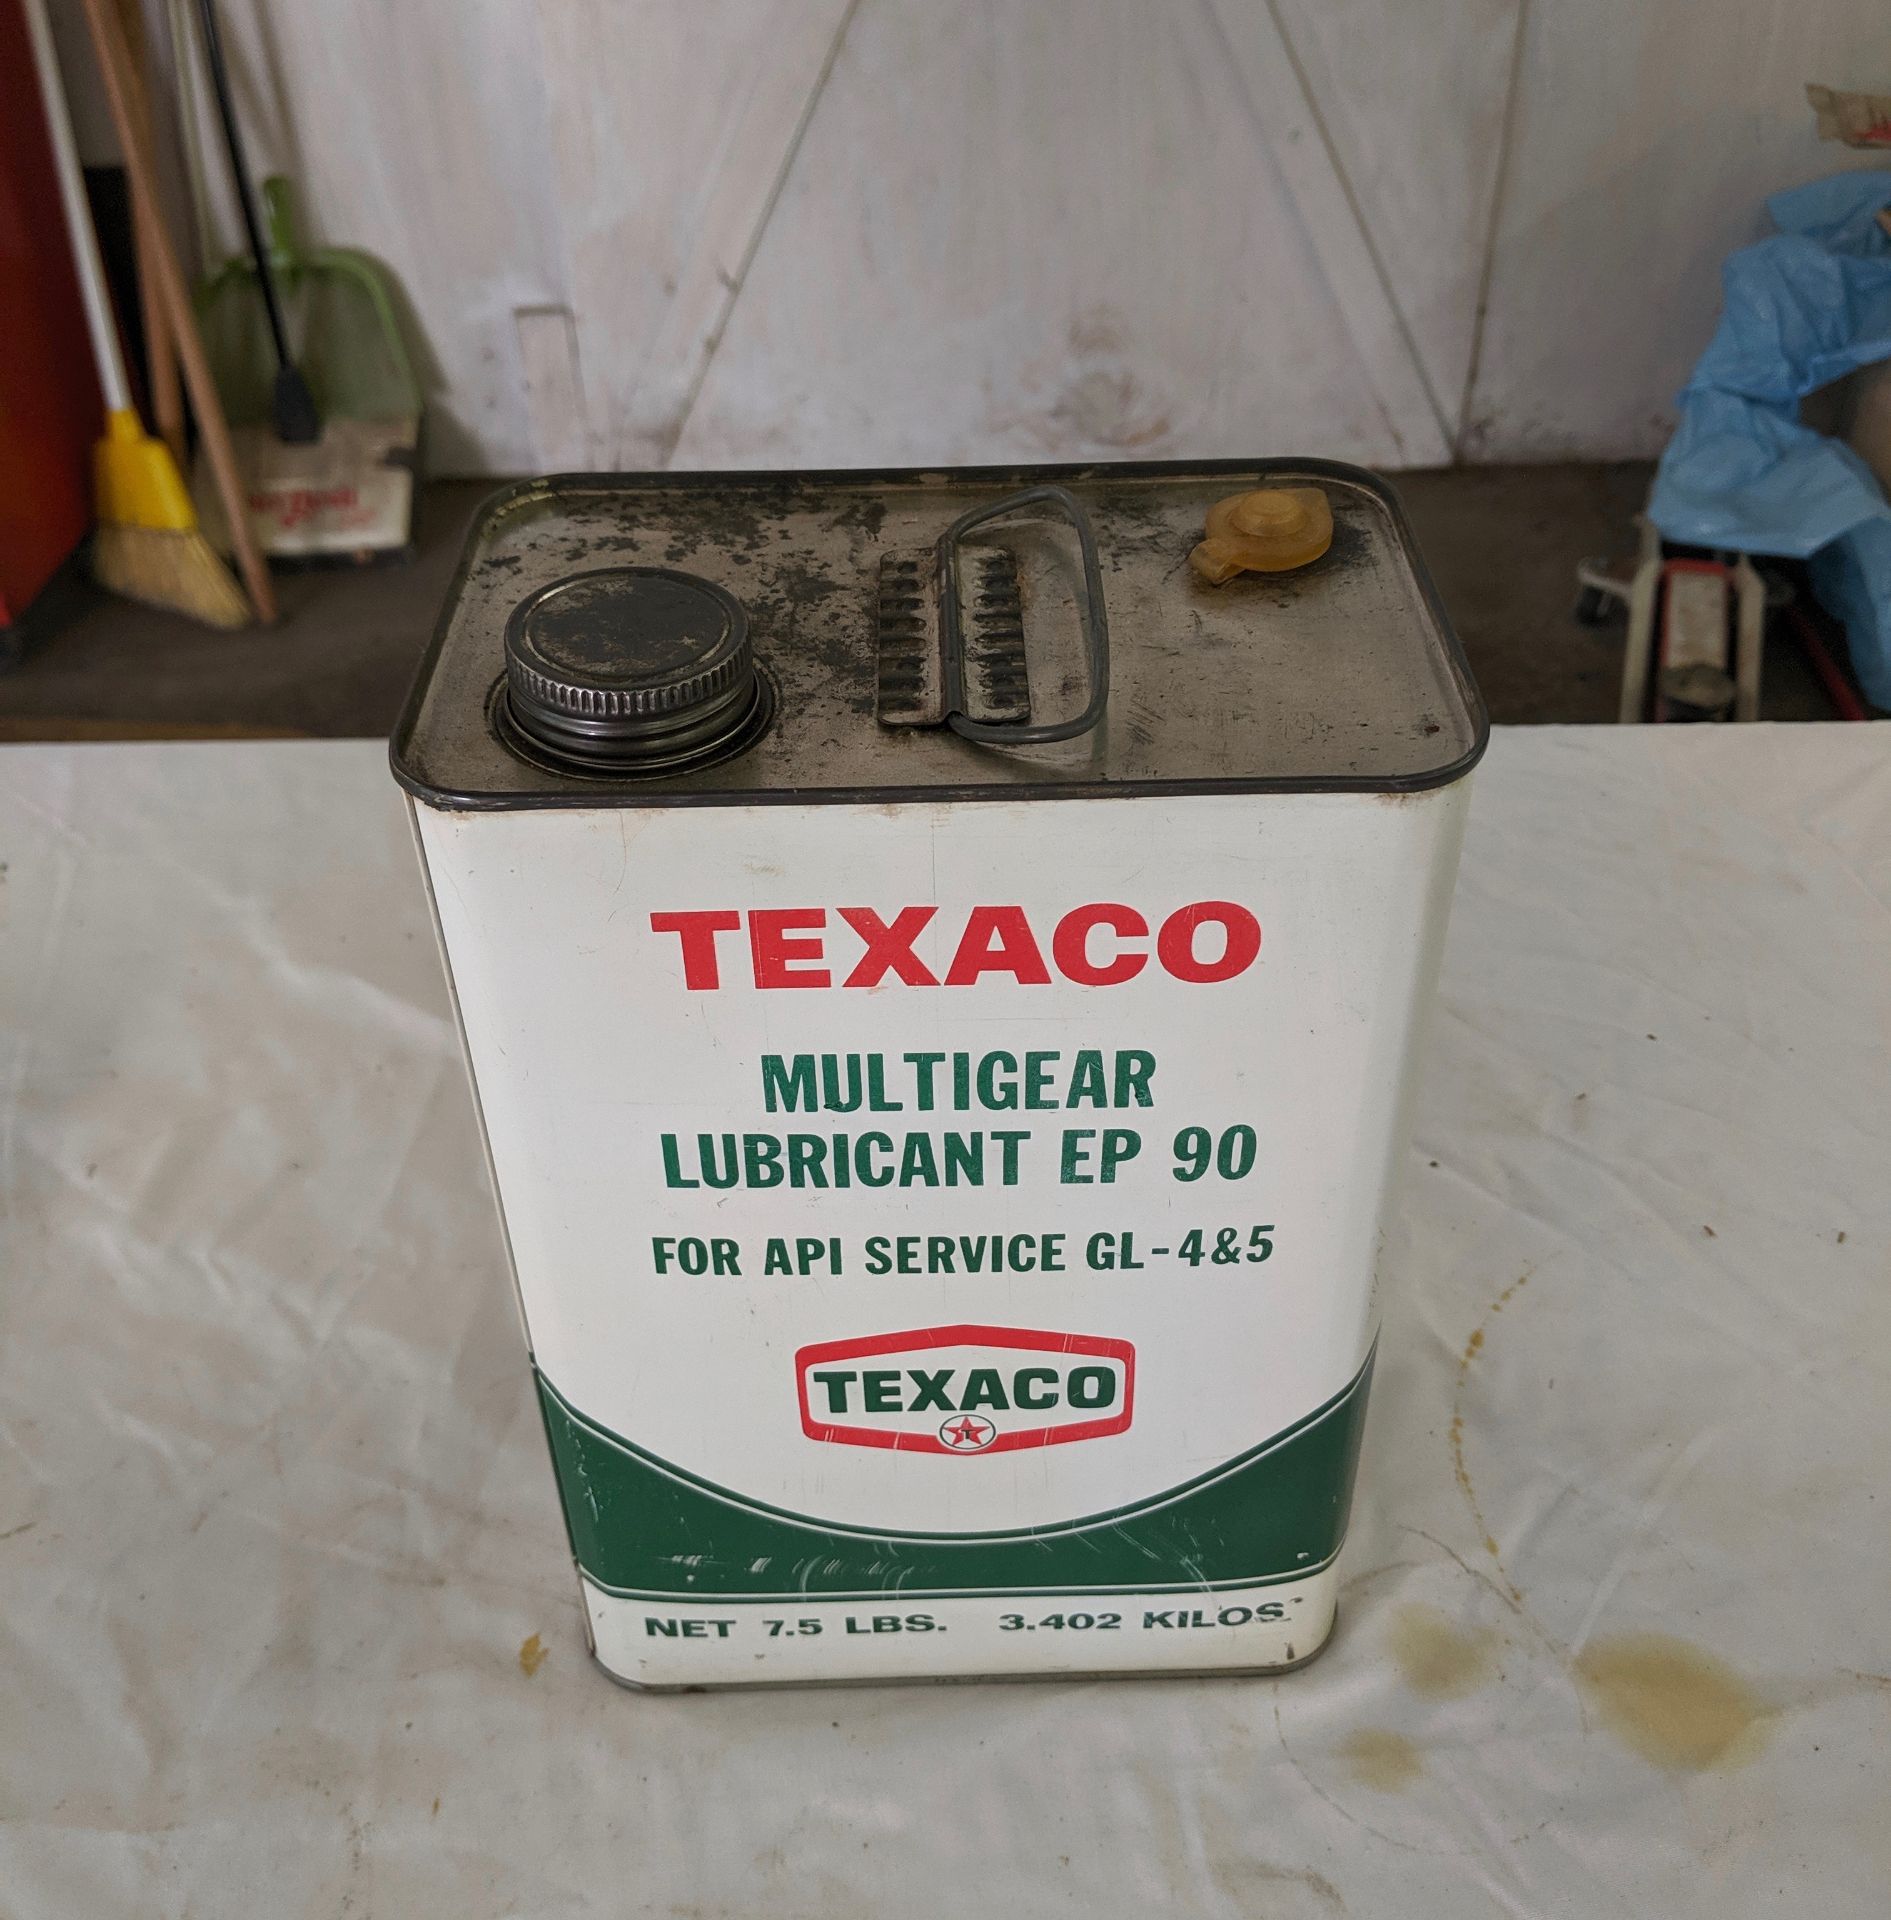 One gallon Texaco multigear lubricant can - full - Image 2 of 5